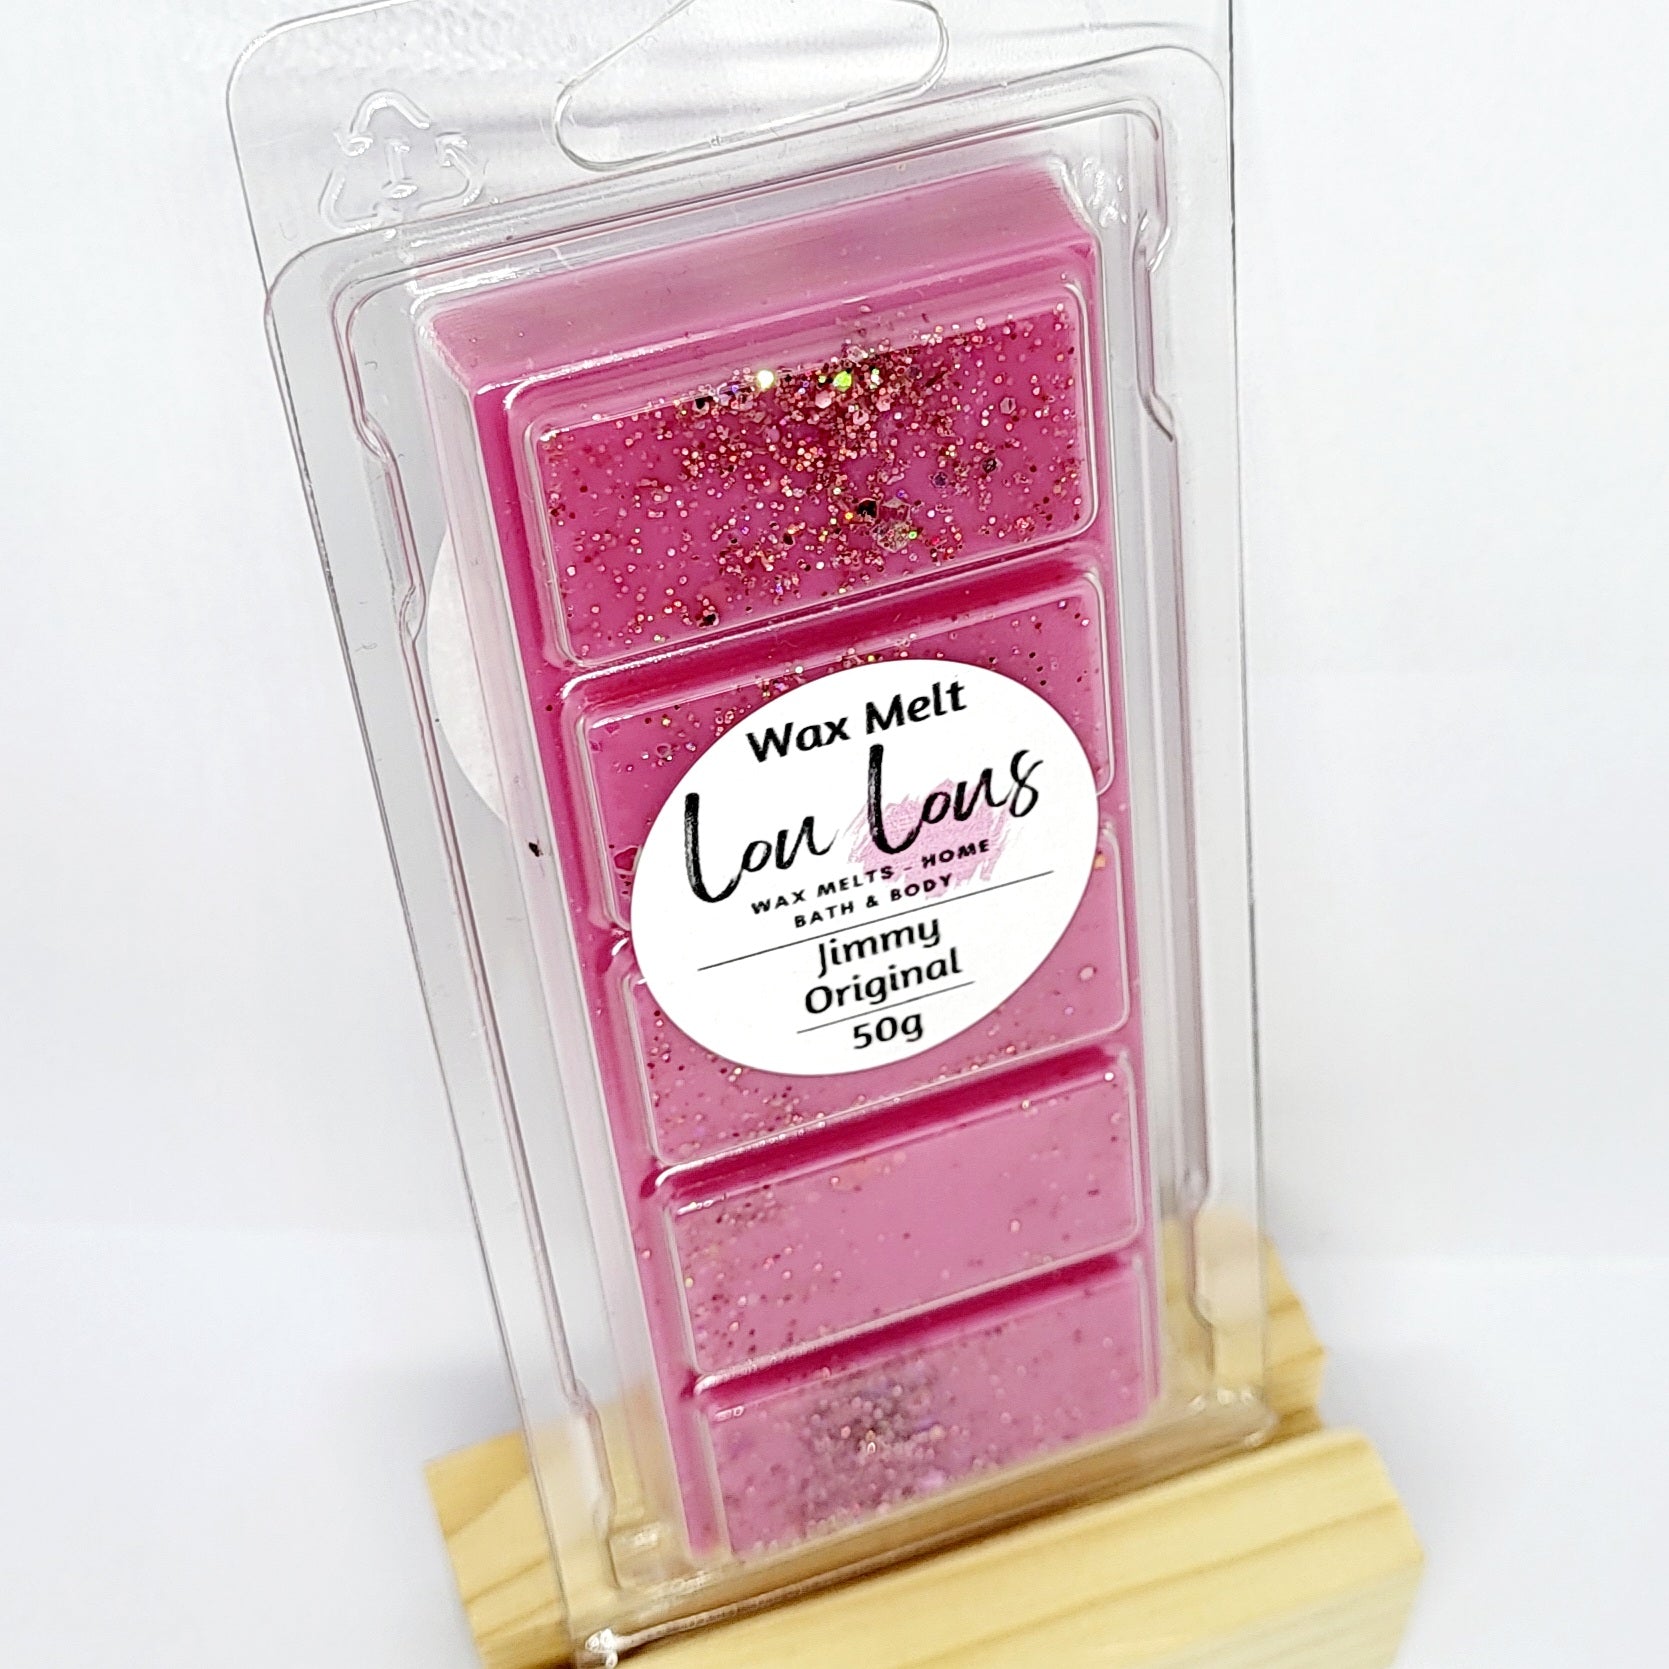 Wax melt snap bar scented in jimmy original